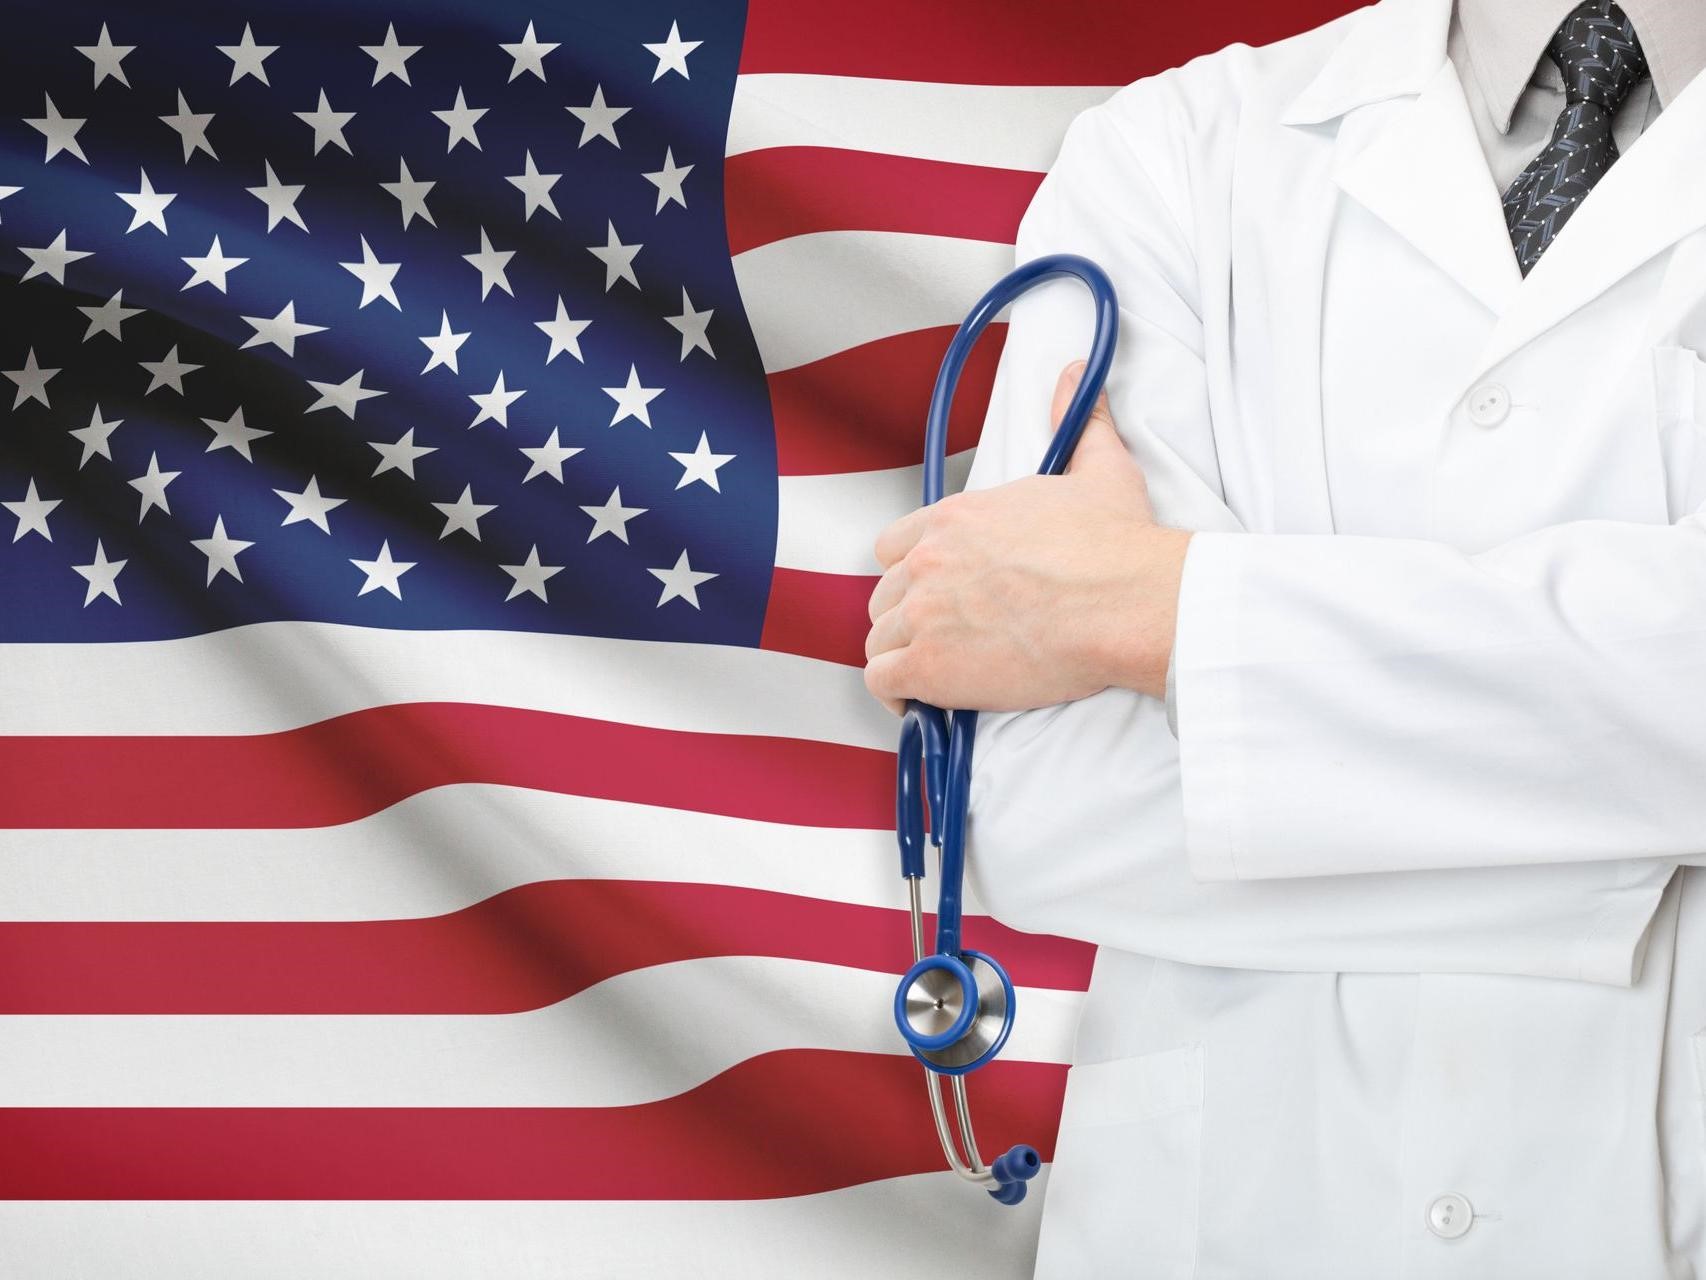 Doctor in white coat holding stethoscope standing in front of an American flag to showcase language training for relocation